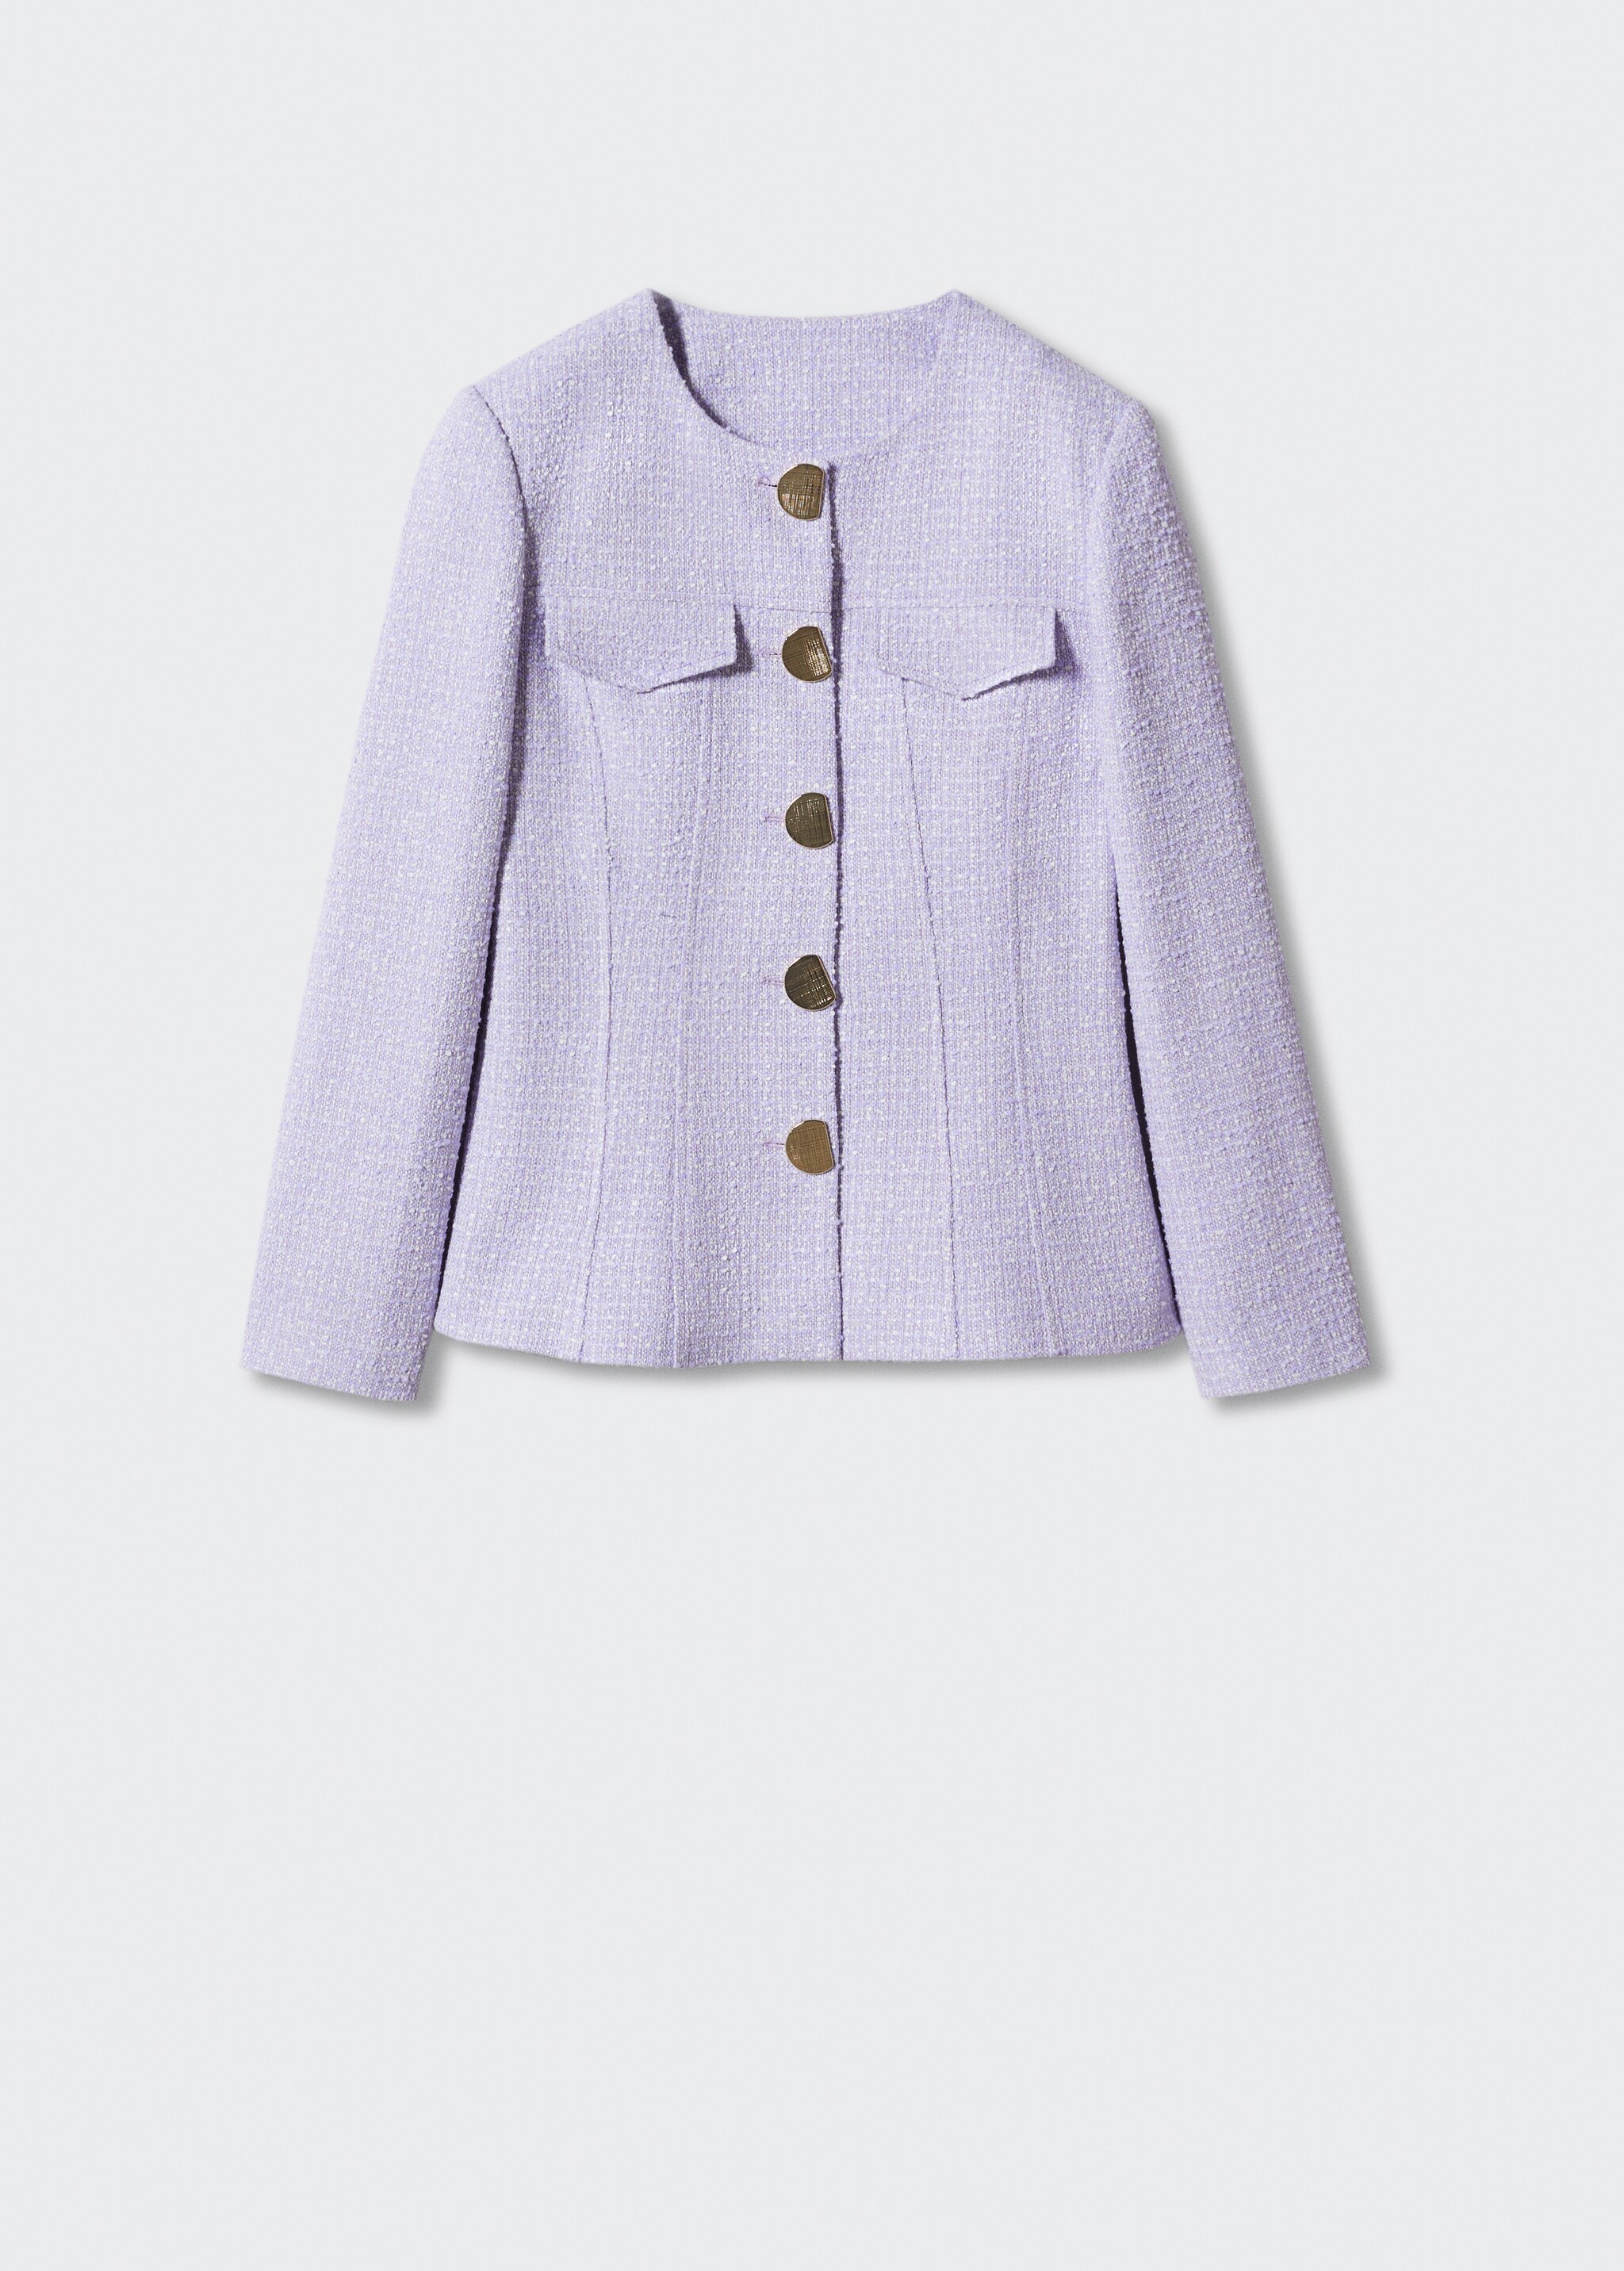 Tweed jacket with metal buttons - Article without model